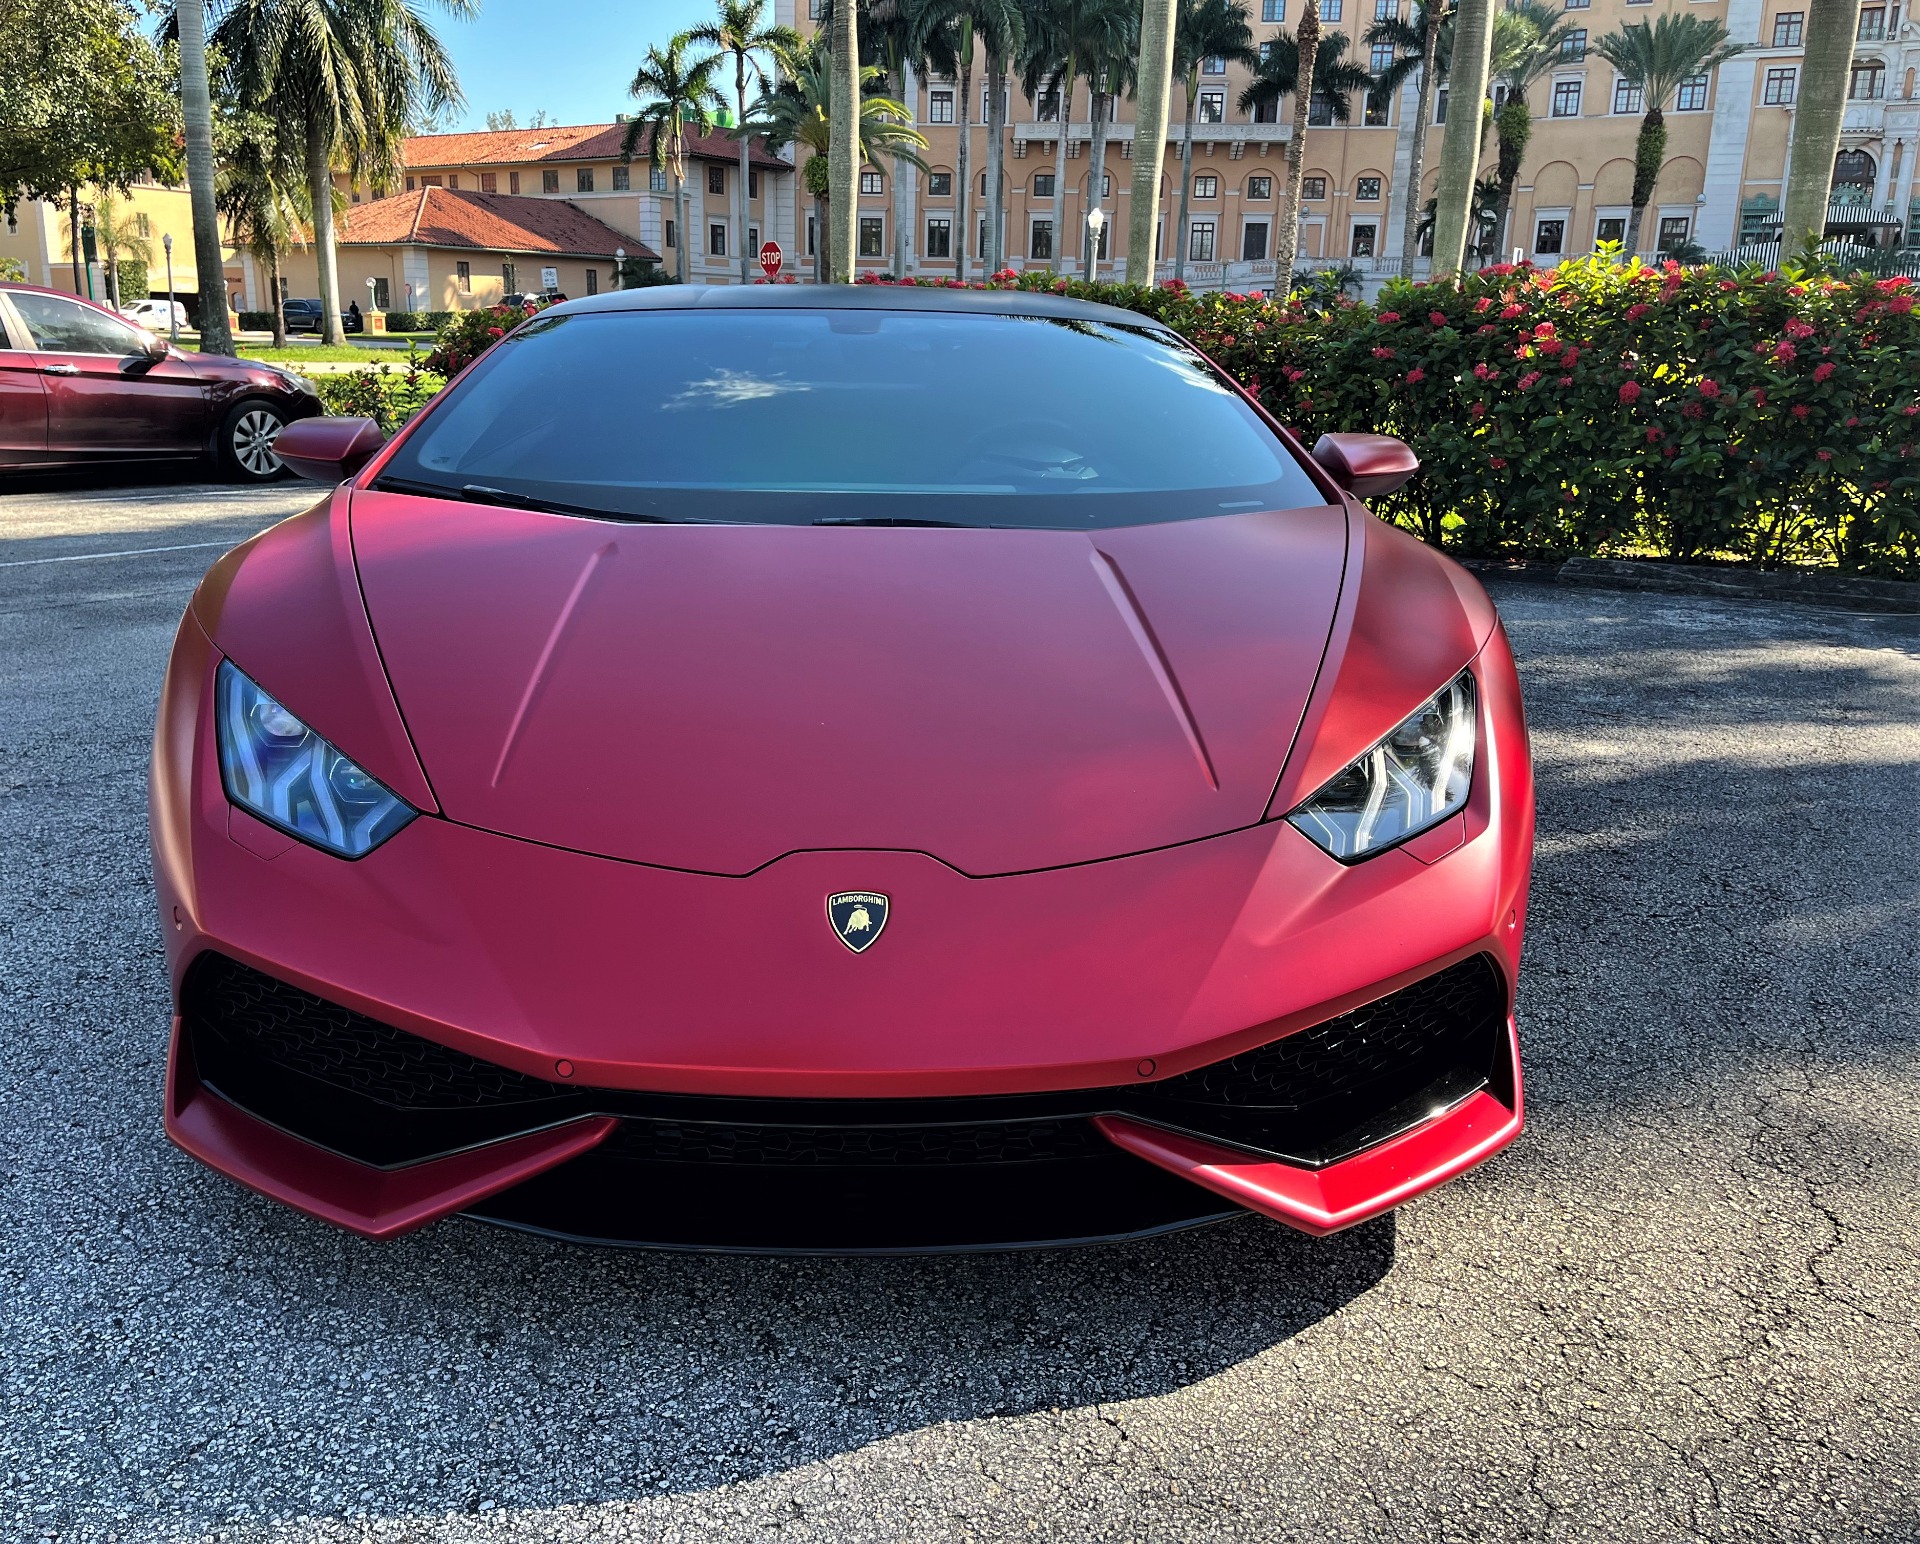 Used 2016 Lamborghini Huracan LP 610-4 for sale $209,850 at The Gables Sports Cars in Miami FL 33146 4